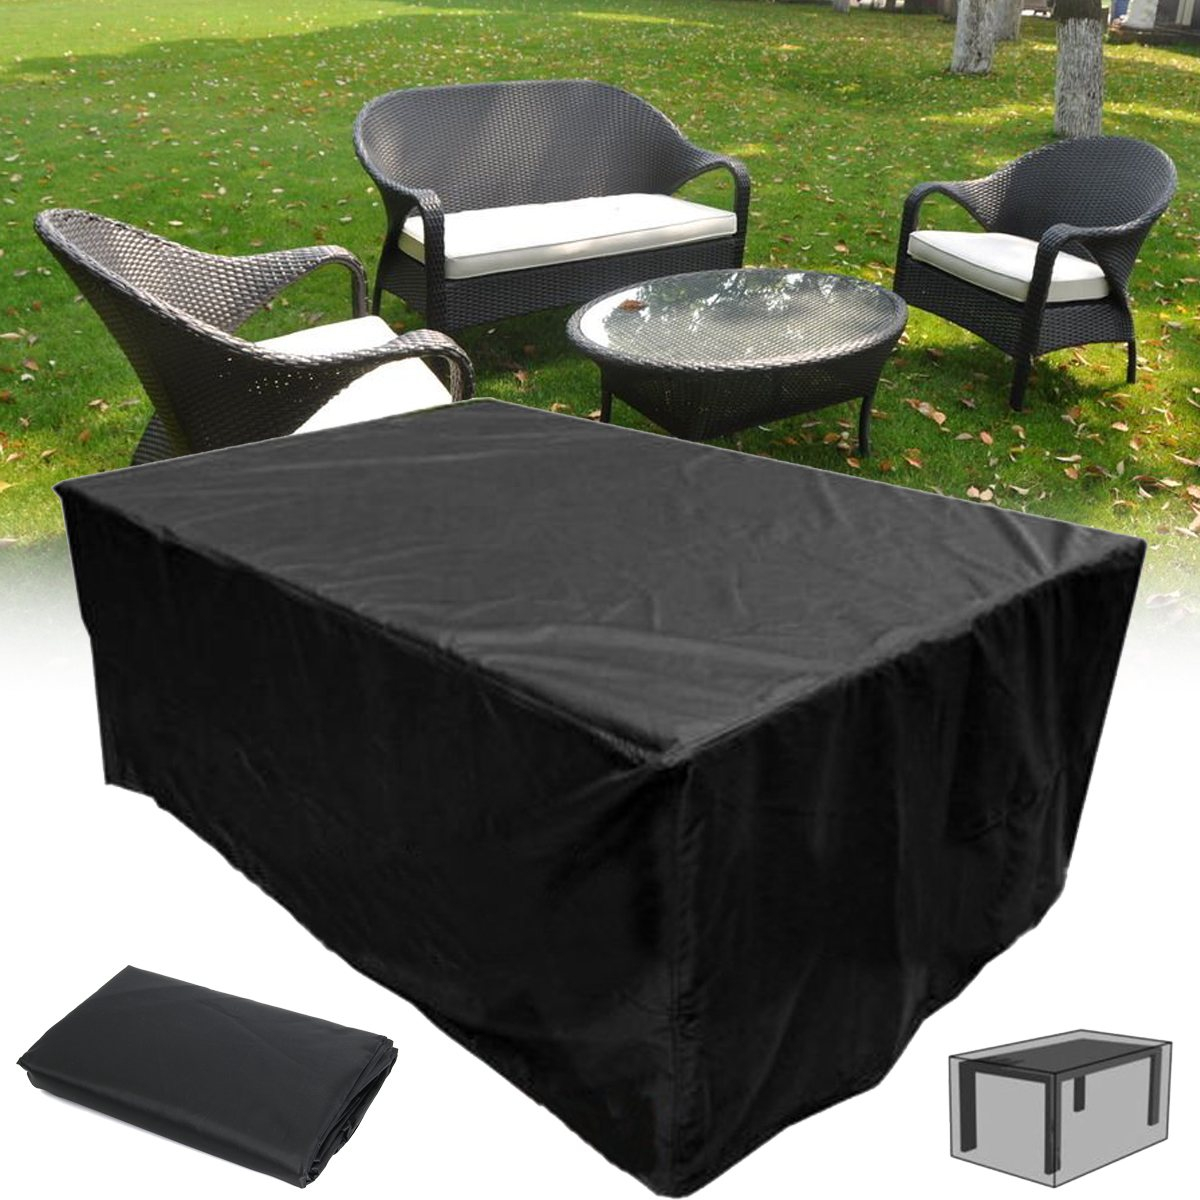 Us 1201 42 Offnew Black Outdoor Garden Patio Furniture Covers Shelter Sun Protection Cover Canopy Dustproof Cloth Table Protect Bag Textiles In with regard to size 1200 X 1200